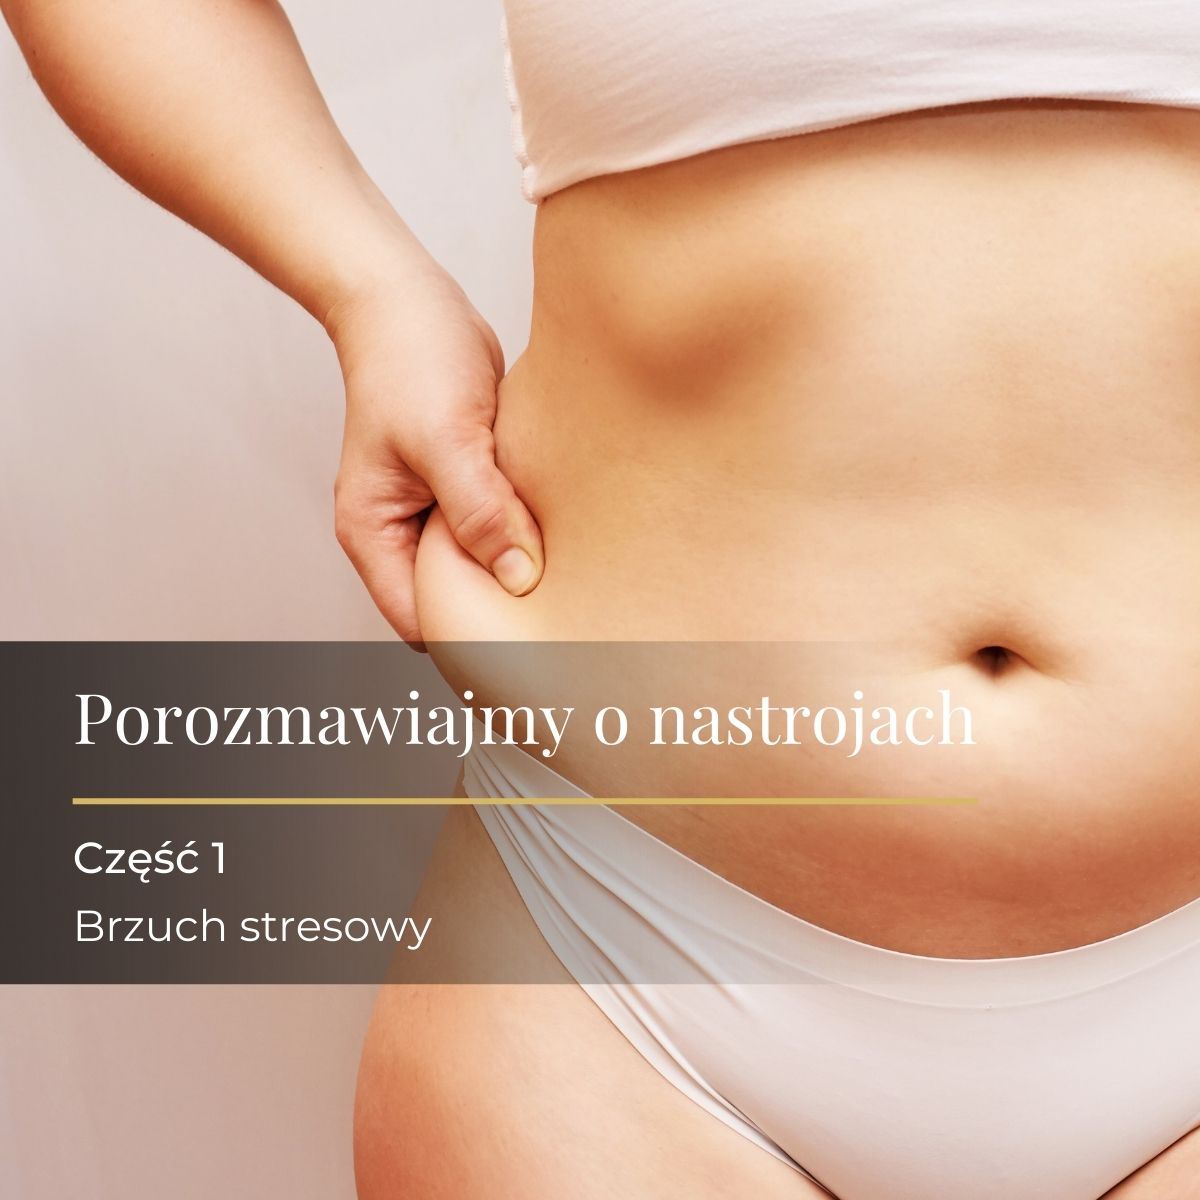 You are currently viewing Brzuch stresowy